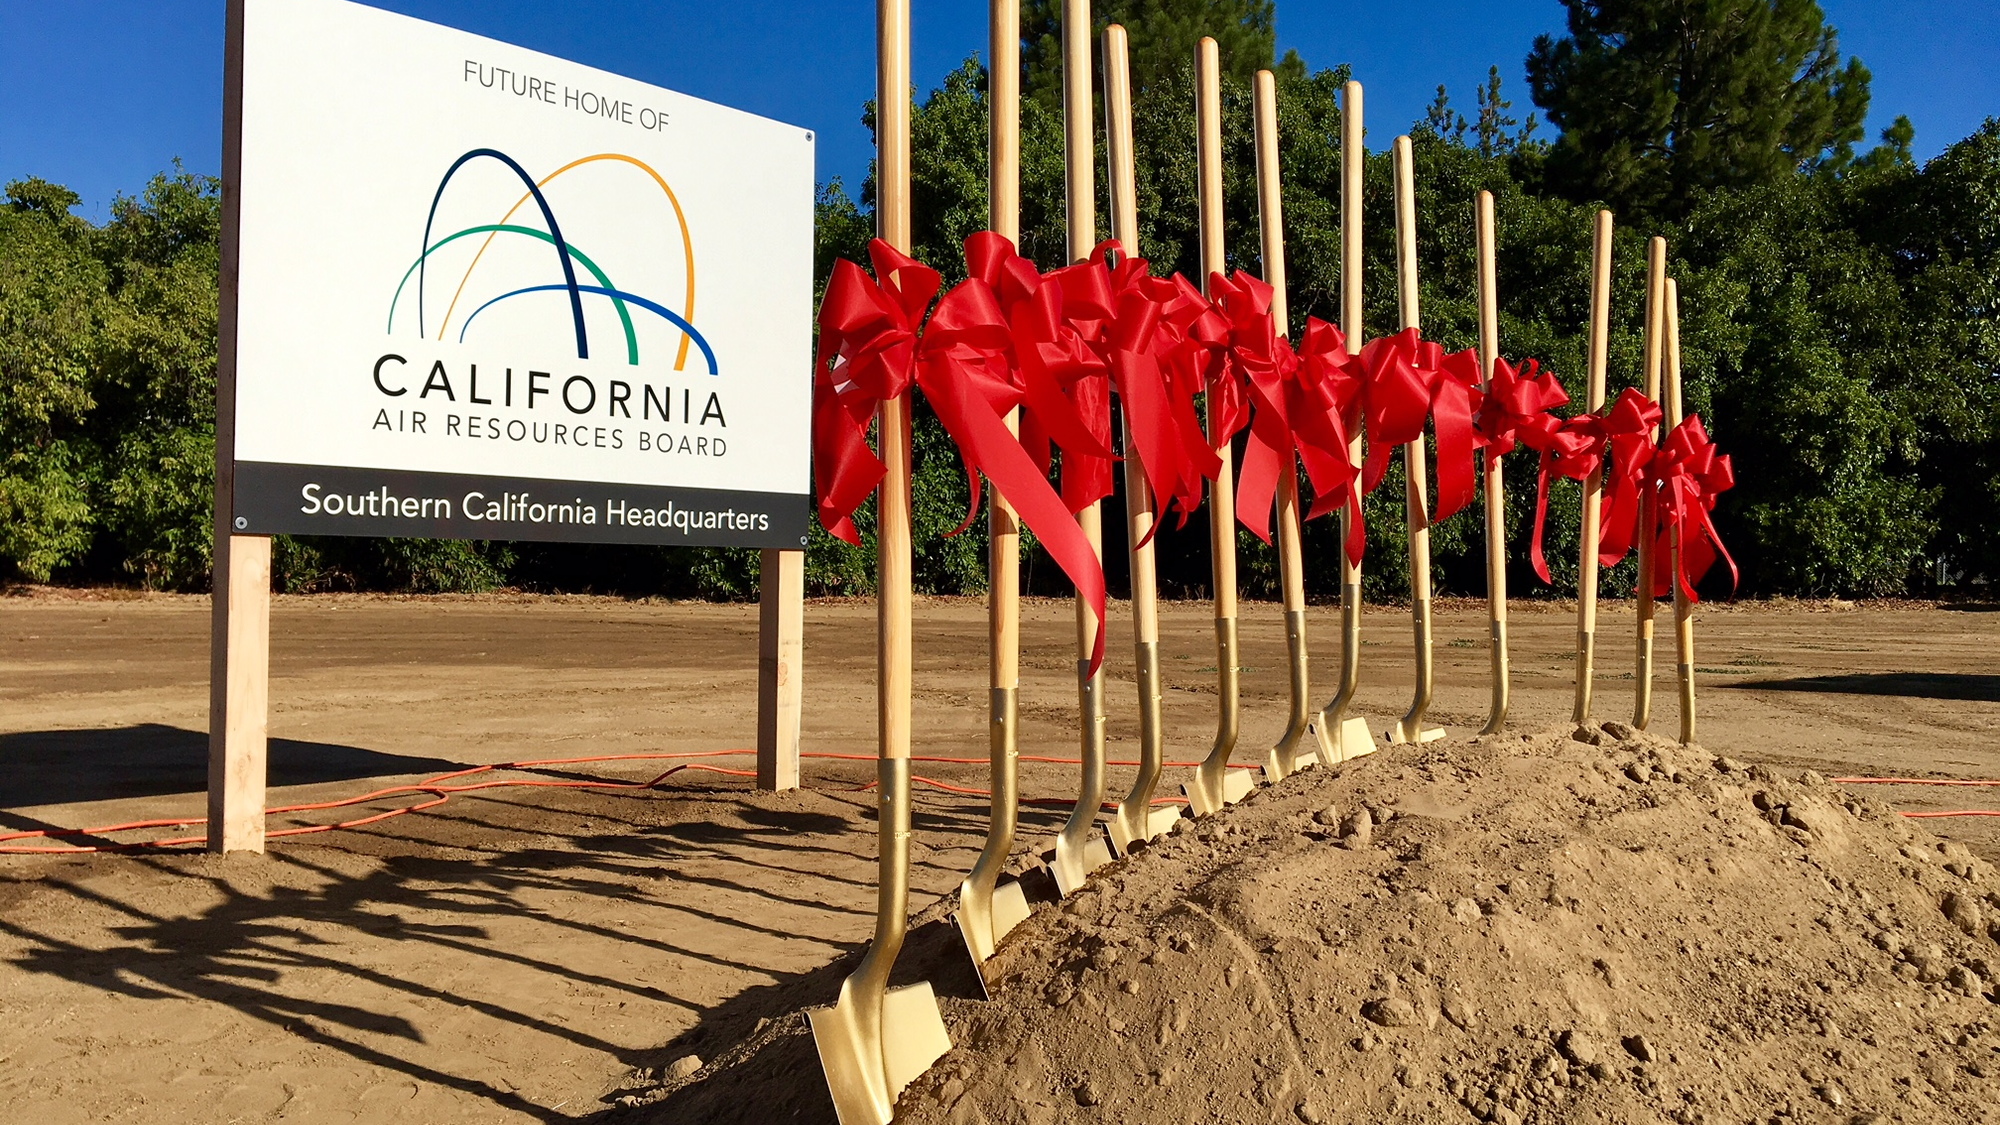 Site of new California Air Resources Board headquarters, Riverside, CA, Oct 2017